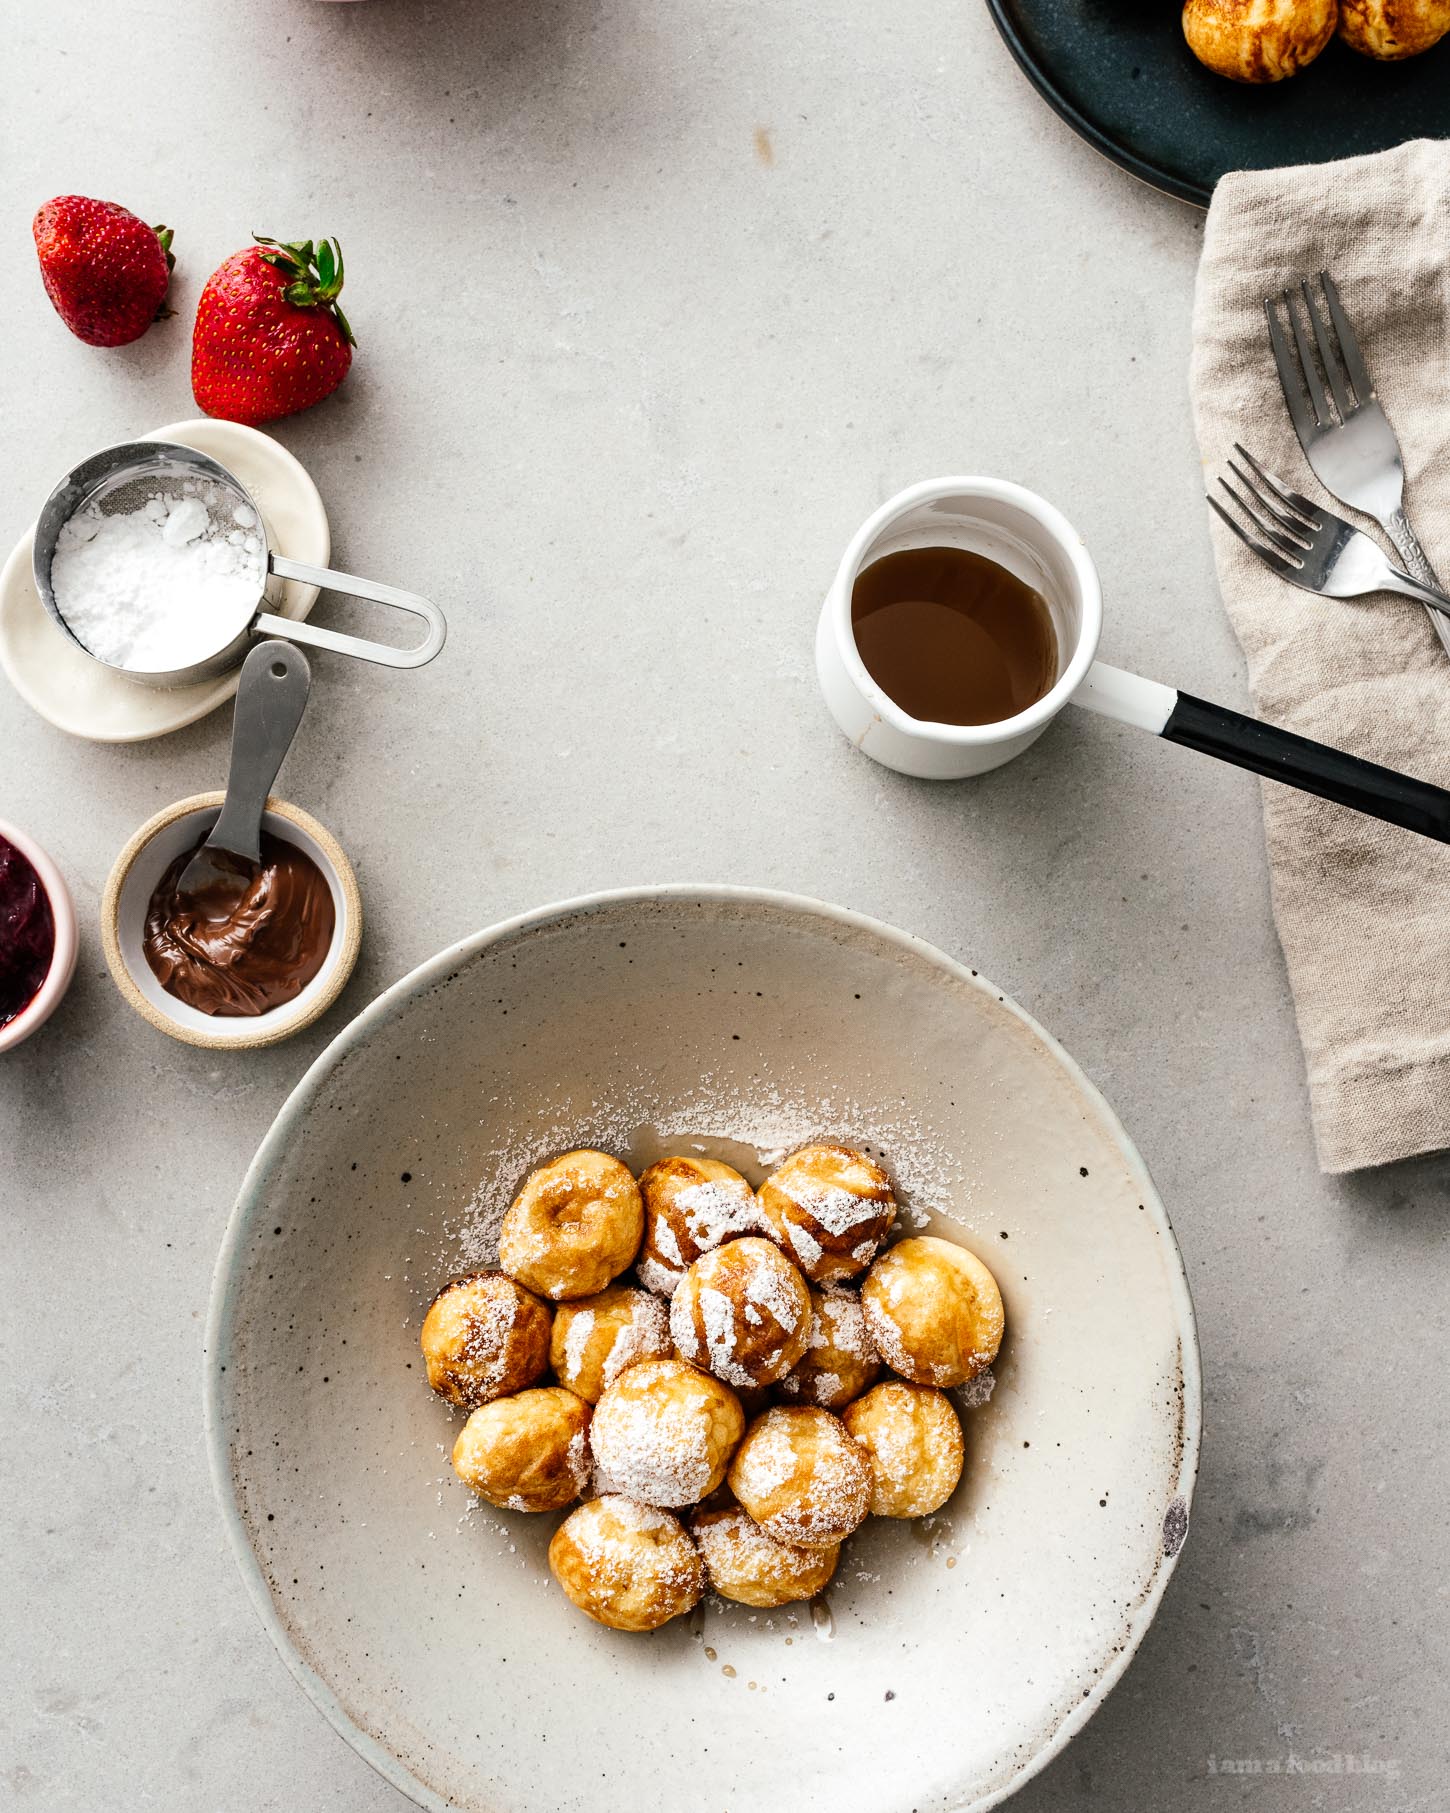 Make Danish aebleskiver at home for the ultimate brunch! Pancakes never looked so cute :) #pancakes #brunch #breakfast #recipes #brunchrecipes #cutefood #pancakeballs #aebleskiver #danish